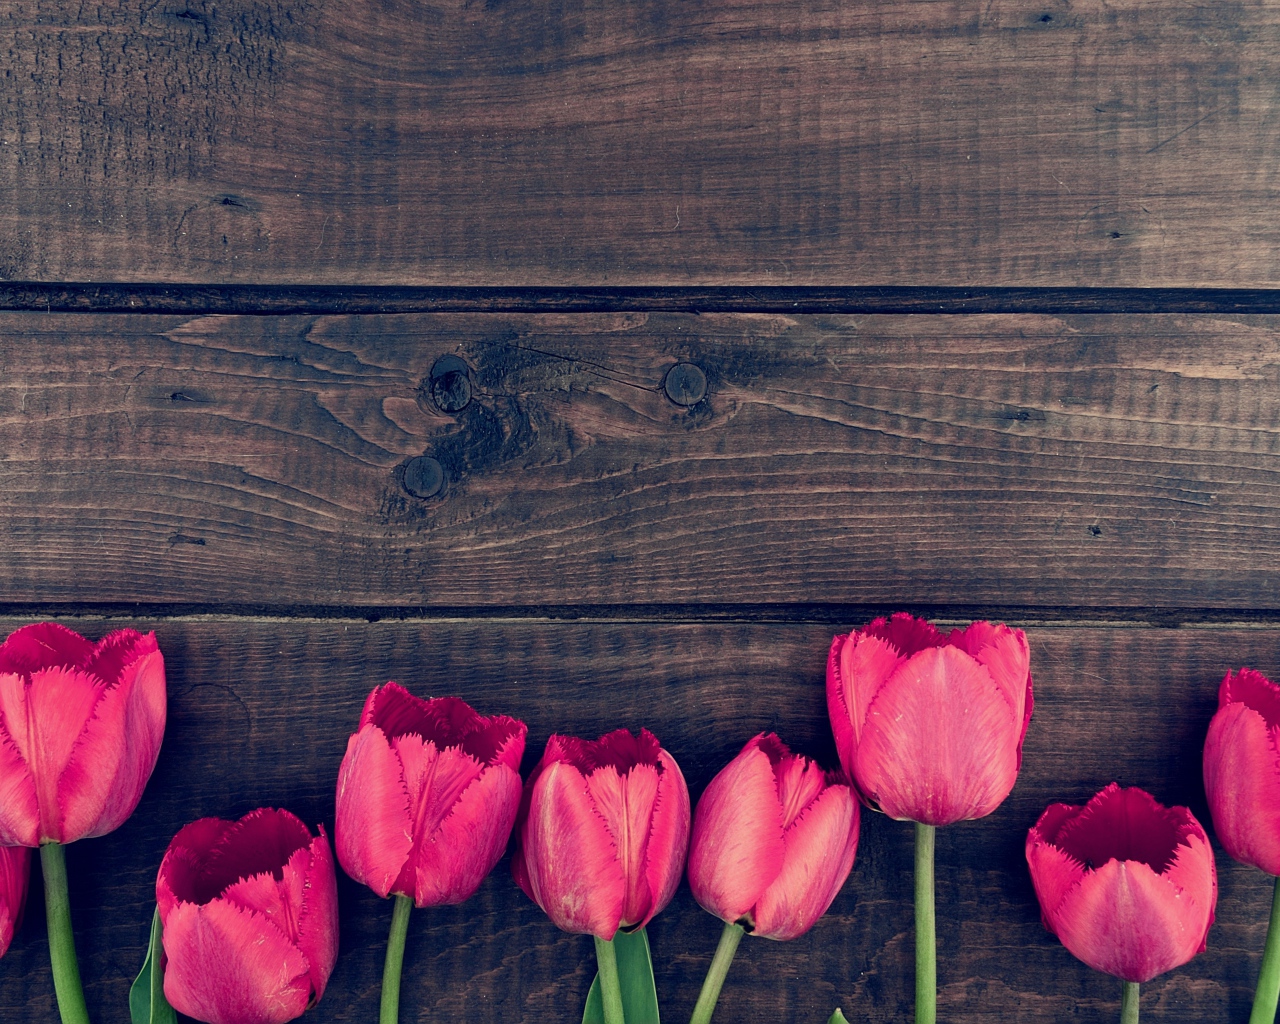 Pink tulip flowers on wooden table